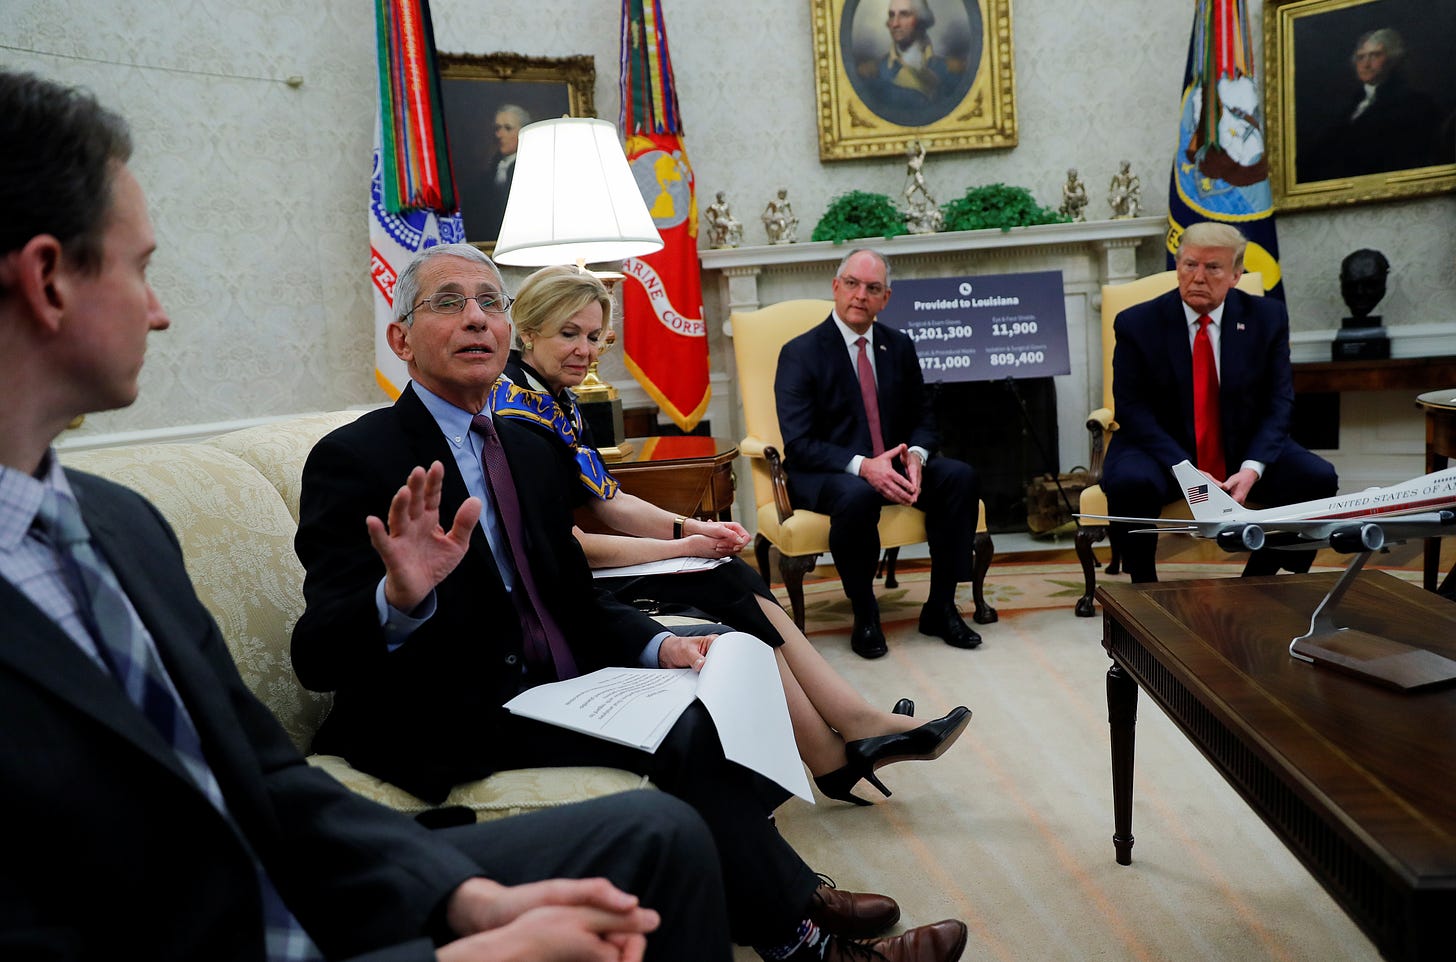 National Institute of Allergy and Infectious Diseases Director Dr. Anthony Fauci speaks during a coronavirus response meeting between U.S. President Donald Trump and Louisiana Governor John Bel Edwards in the Oval Office at the White House in Washington, U.S., April 29, 2020.